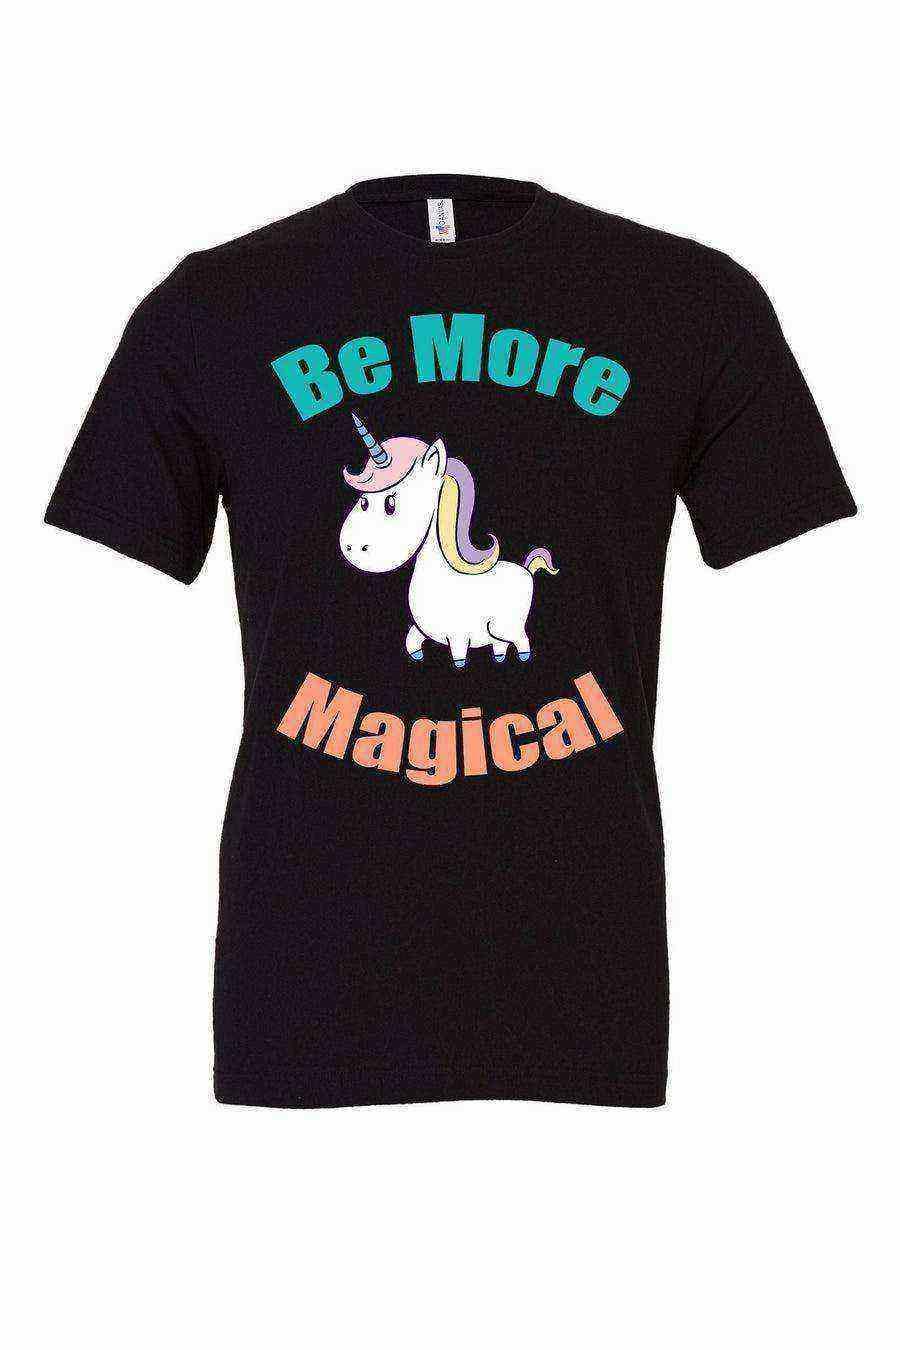 Youth | Be More Magical Unisex Tee | Unicorn Shirt - Dylan's Tees